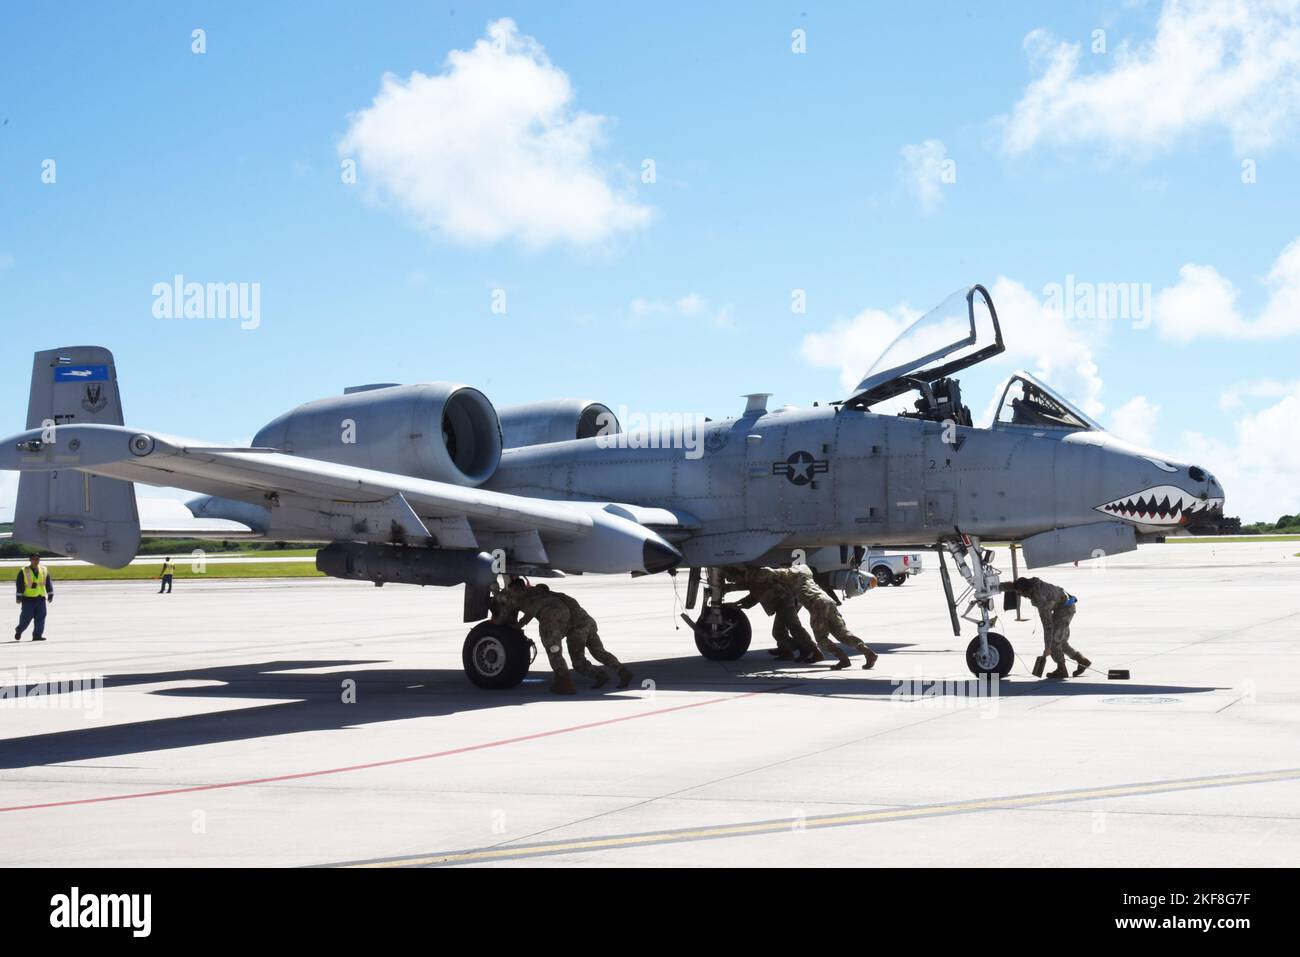 Five 23rd Air Expeditionary Wing Airmen push an A-10C Thunderbolt II into position at Saipan International Airport in Saipan, Commonwealth of the Northern Mariana Islands, Nov. 7, 2022. 23rd AEW and ARFF members learned from shared aircraft familiarization and first responder emergency procedure training. (U.S. Air Force photo by 1st Lt. Christian Little) Stock Photo